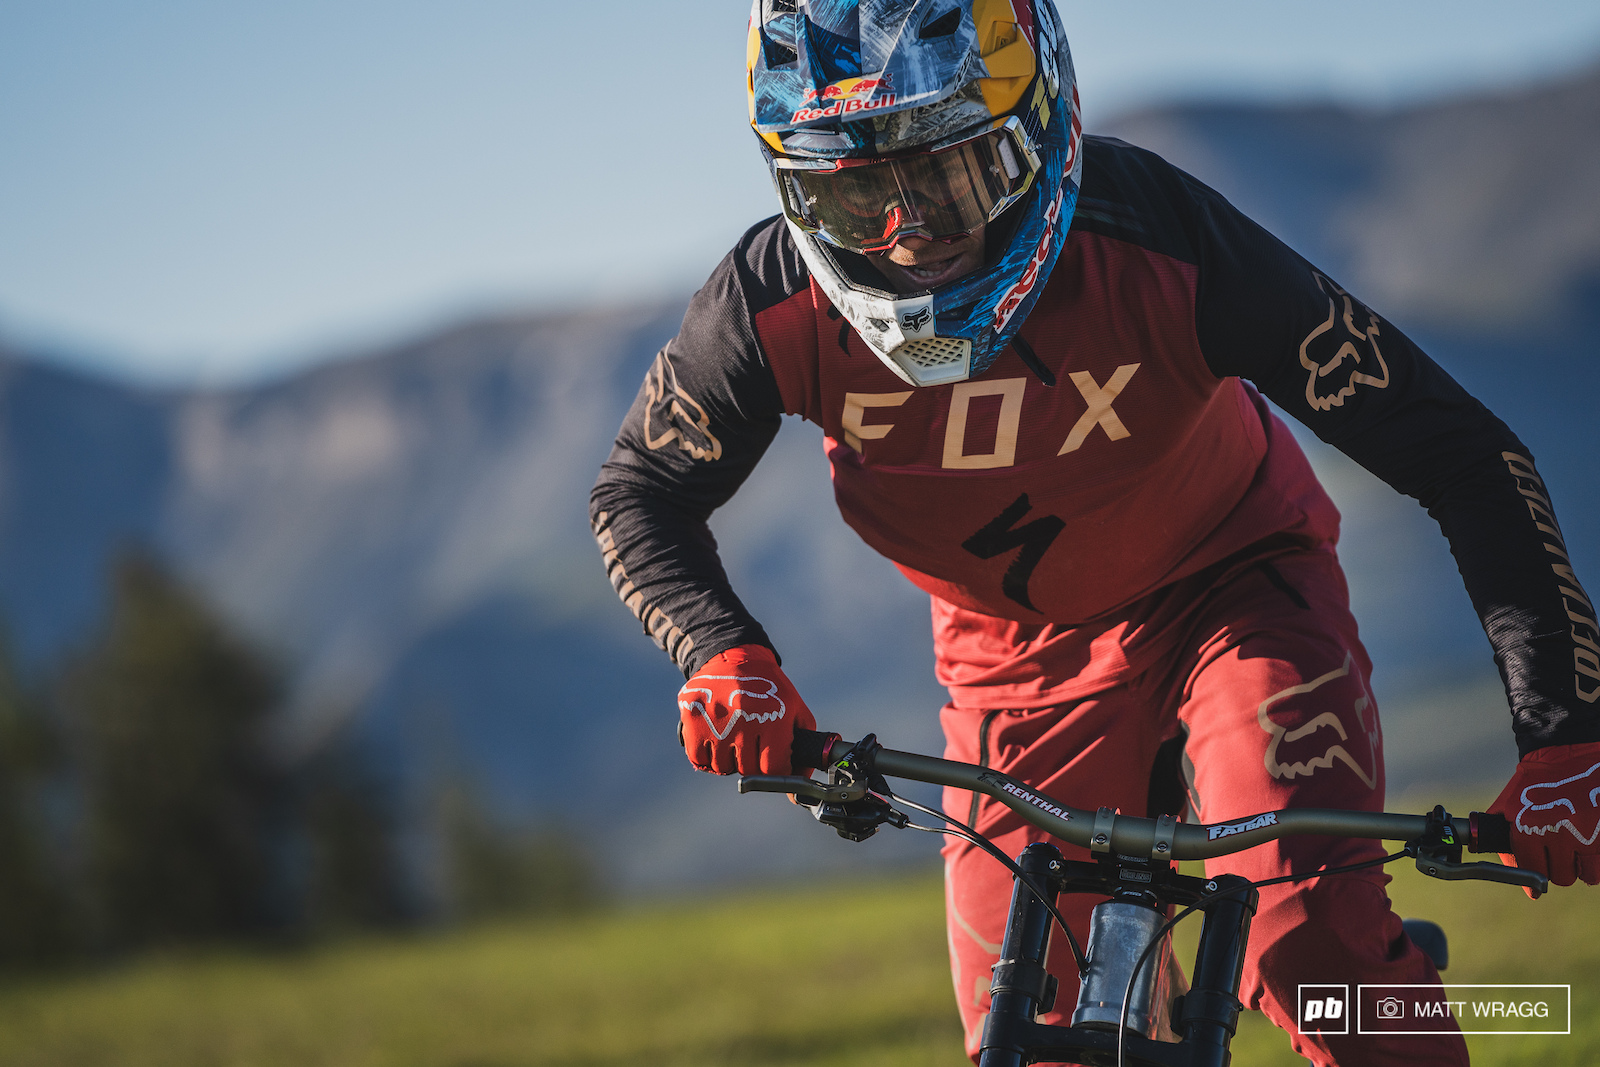 Loic Bruni in Valberg for French Lines. Valberg France Photo by Matt Wragg